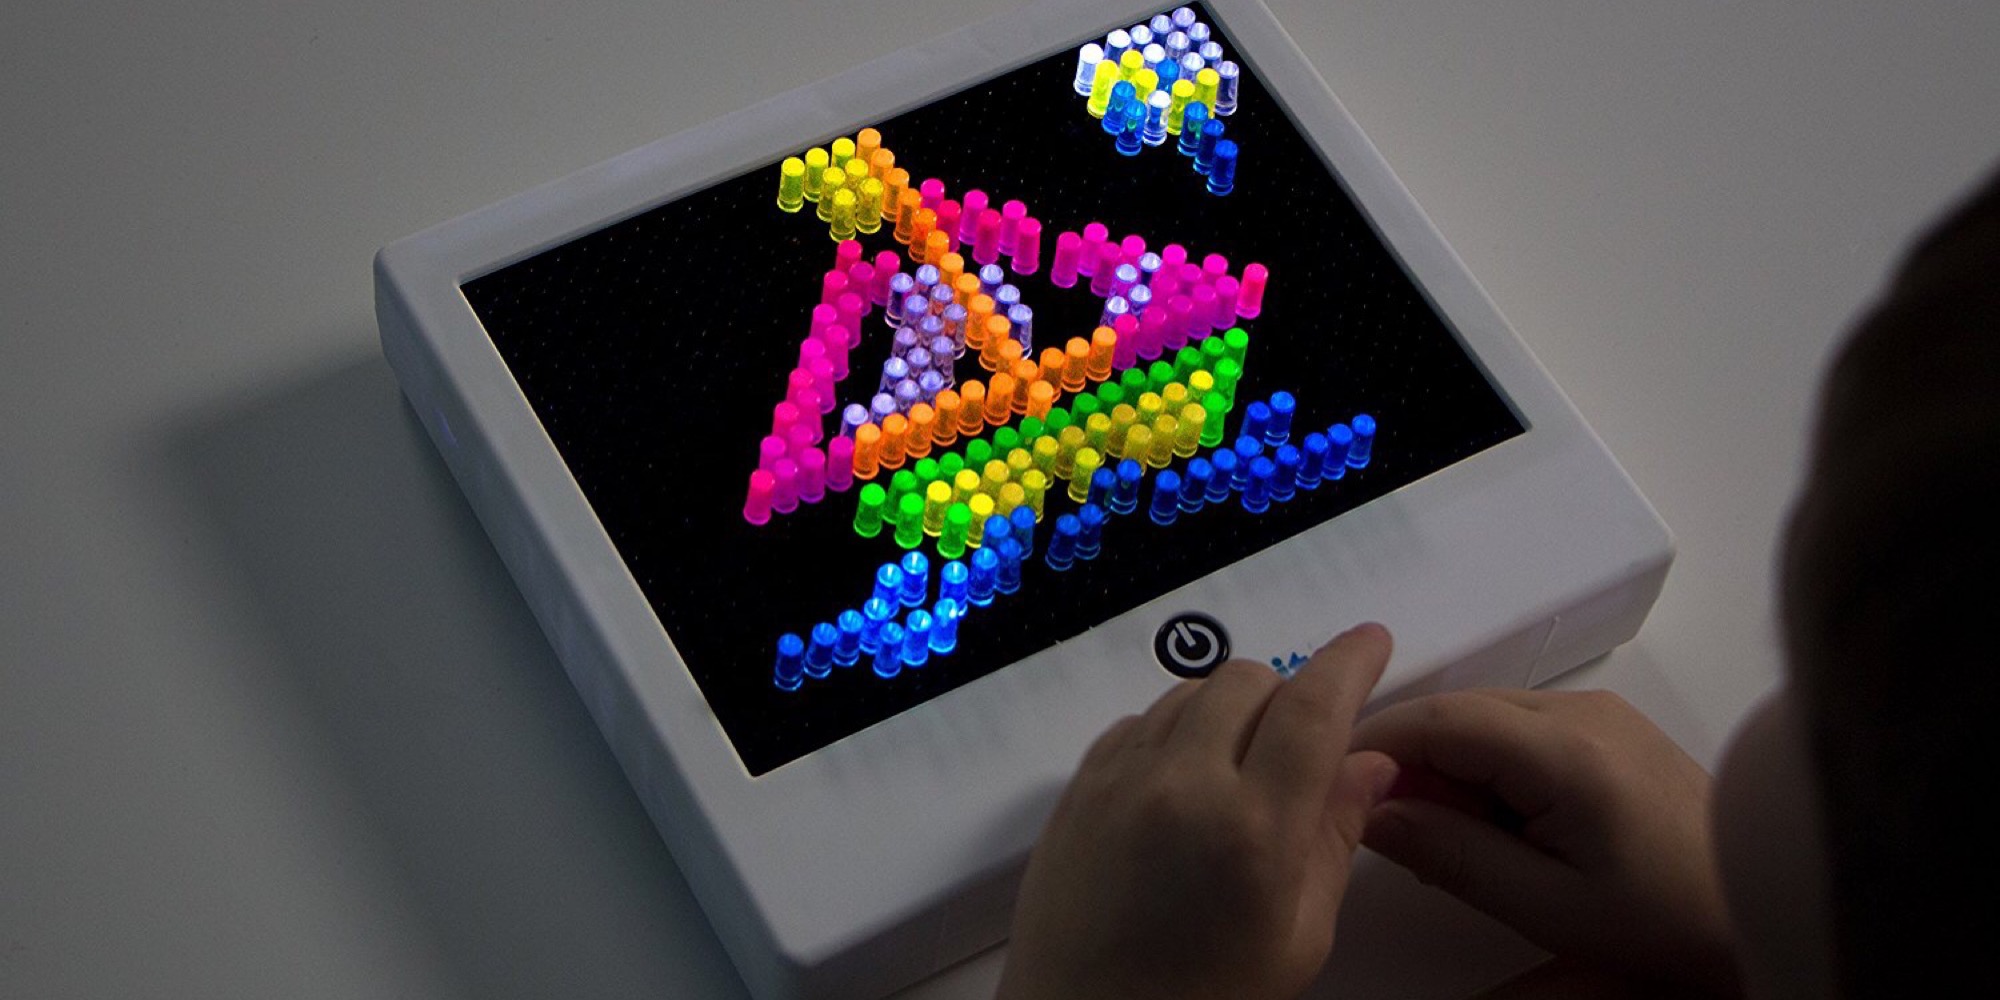 relive-your-childhood-w-this-retro-lite-brite-magic-screen-toy-set